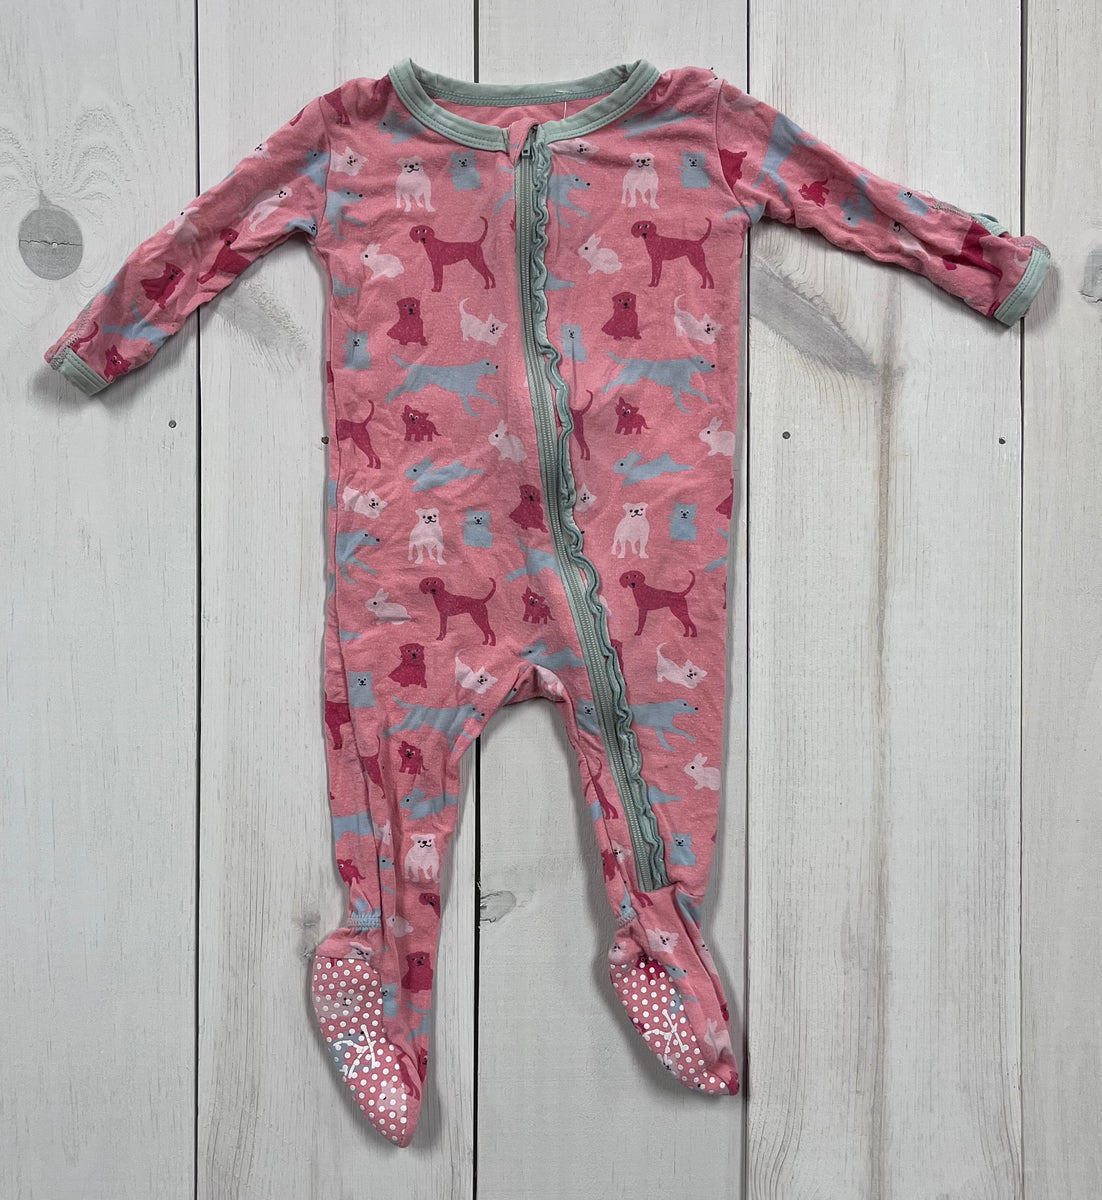 Minnows Childhood Goods Hanna Andersson 2 pc Outfit, 2T